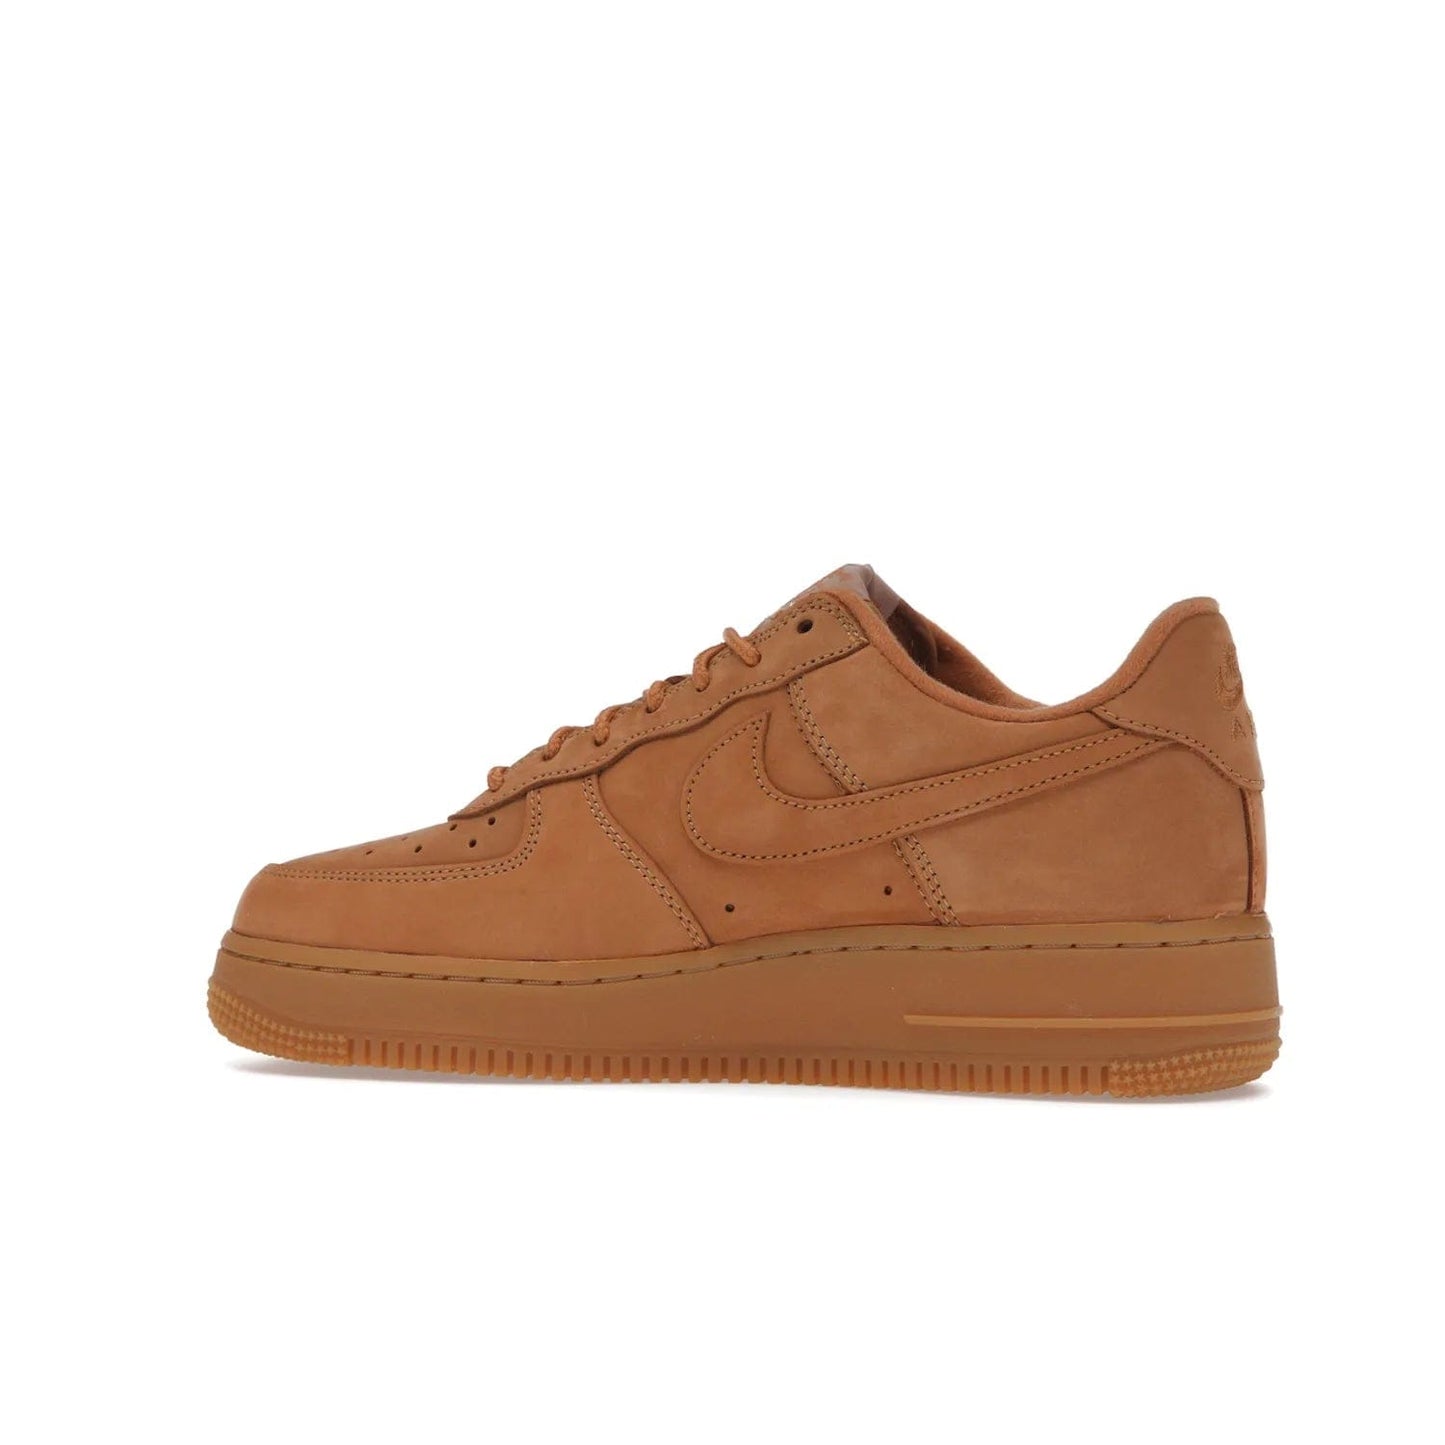 Nike Air Force 1 Low SP Supreme Wheat - Image 21 - Only at www.BallersClubKickz.com - A luxe Flax Durabuck upper and Supreme Box Logo insignias on the lateral heels make the Nike Air Force 1 Low SP Supreme Wheat a stylish lifestyle shoe. Matching Flax Air sole adds a classic touch to this collaboration between Nike and Supreme. Make a statement with this edition of the classic Air Force 1 Low.